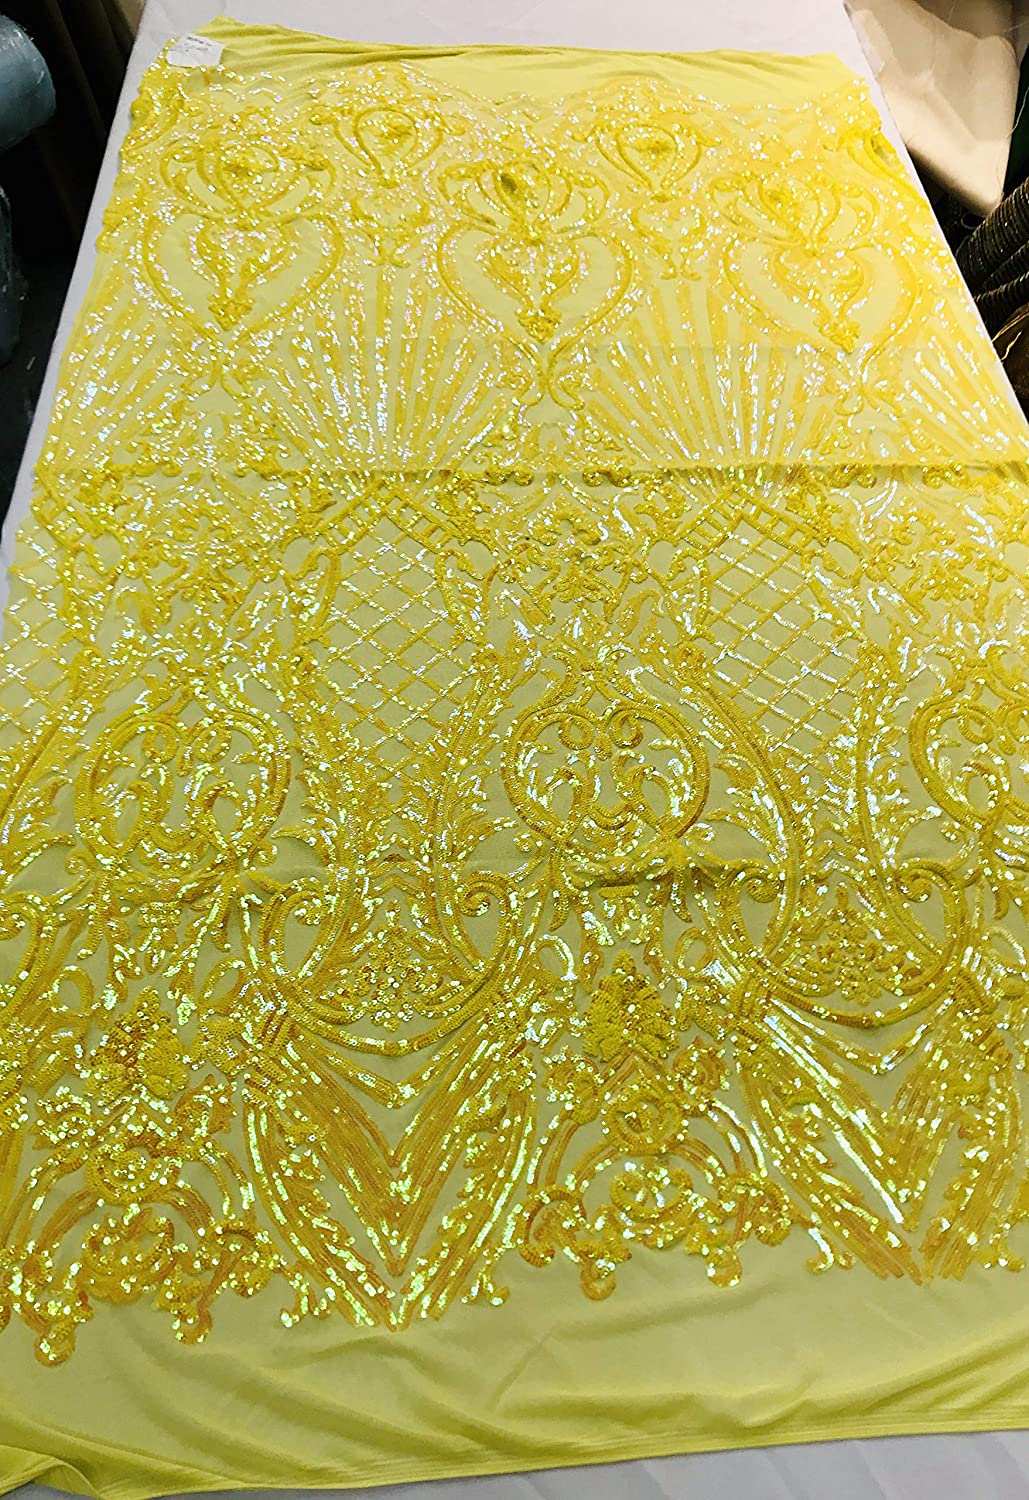 Damask Sequins Design on a 4 Way Stretch Mesh Fabric - for Night Gowns - Prom Dresses - (Yellow Iridescent, 1 Yard)